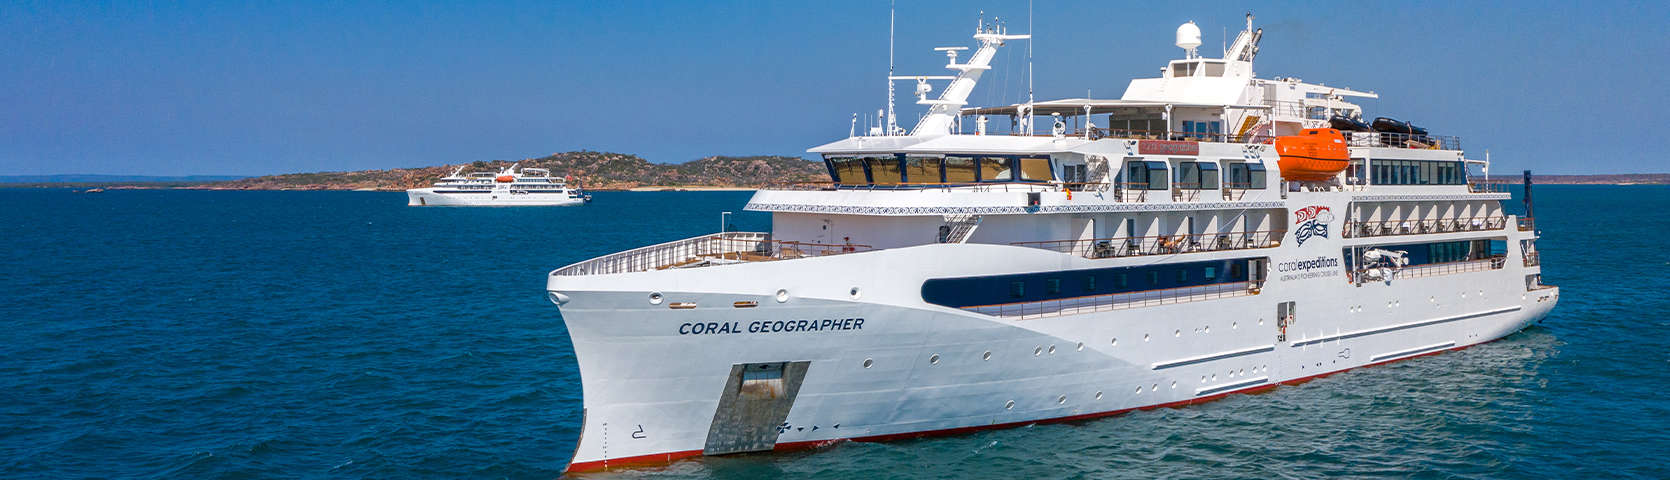 Coral-Geographer-and-Coral-Adventurer-Cruise-Ships-In-The-Kimberley-May-2021